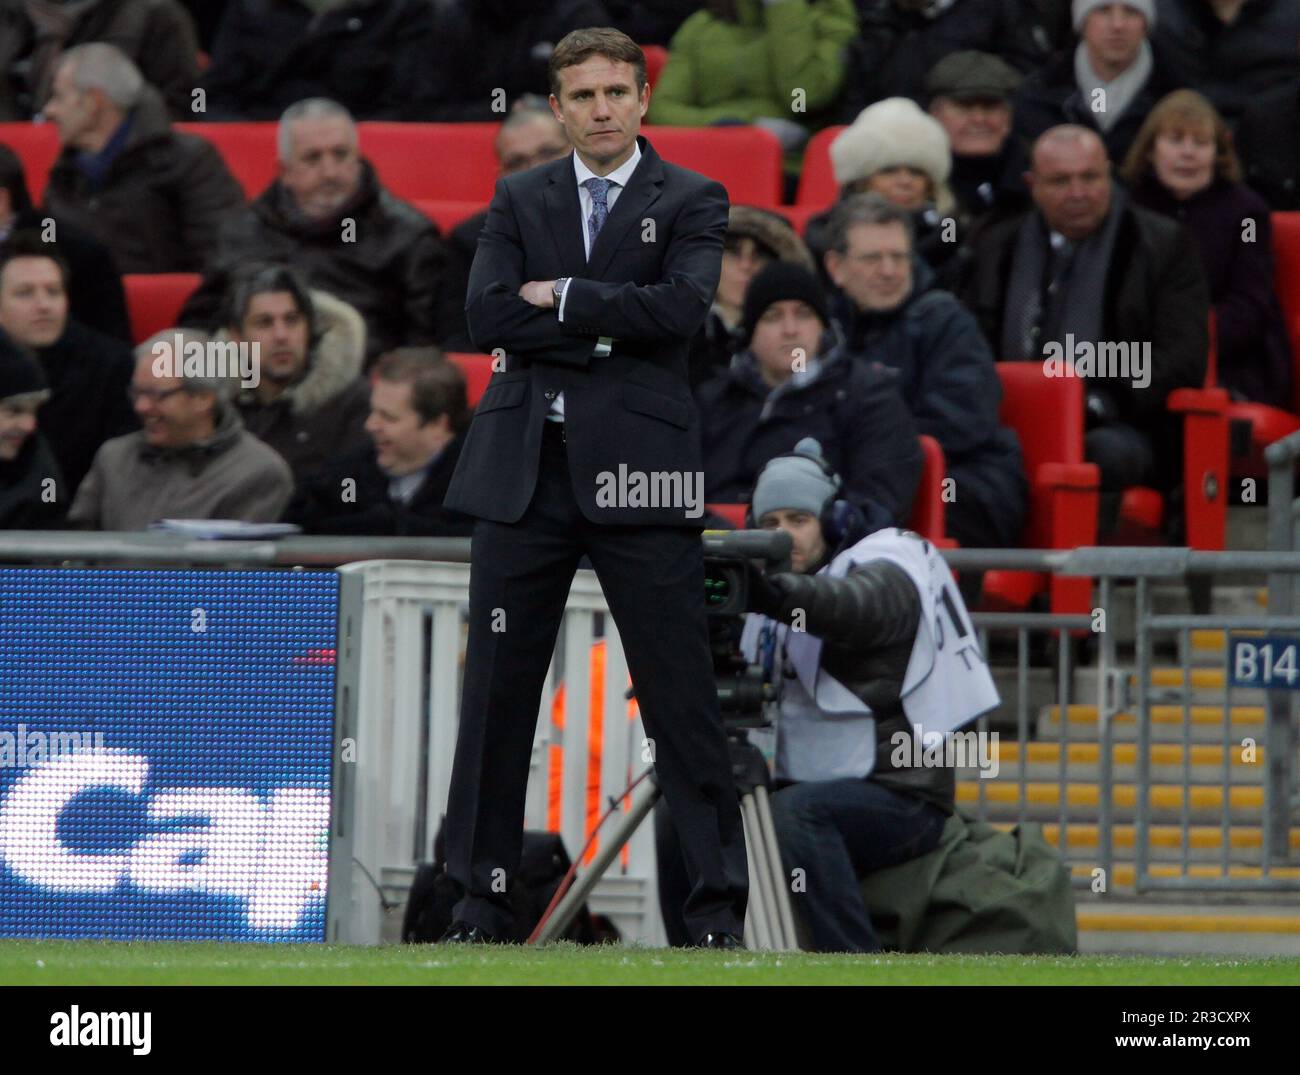 PHIL PARKINSON, BRADFORD CITY MANAGERBRADFORD CITY V SWANSEA CITY BRADFORD CITY V SWANSEA CITY CAPITAL ONE FOOTBALL LEAGUE CUP FINAL 2013 WEMBLEY STAD Foto Stock